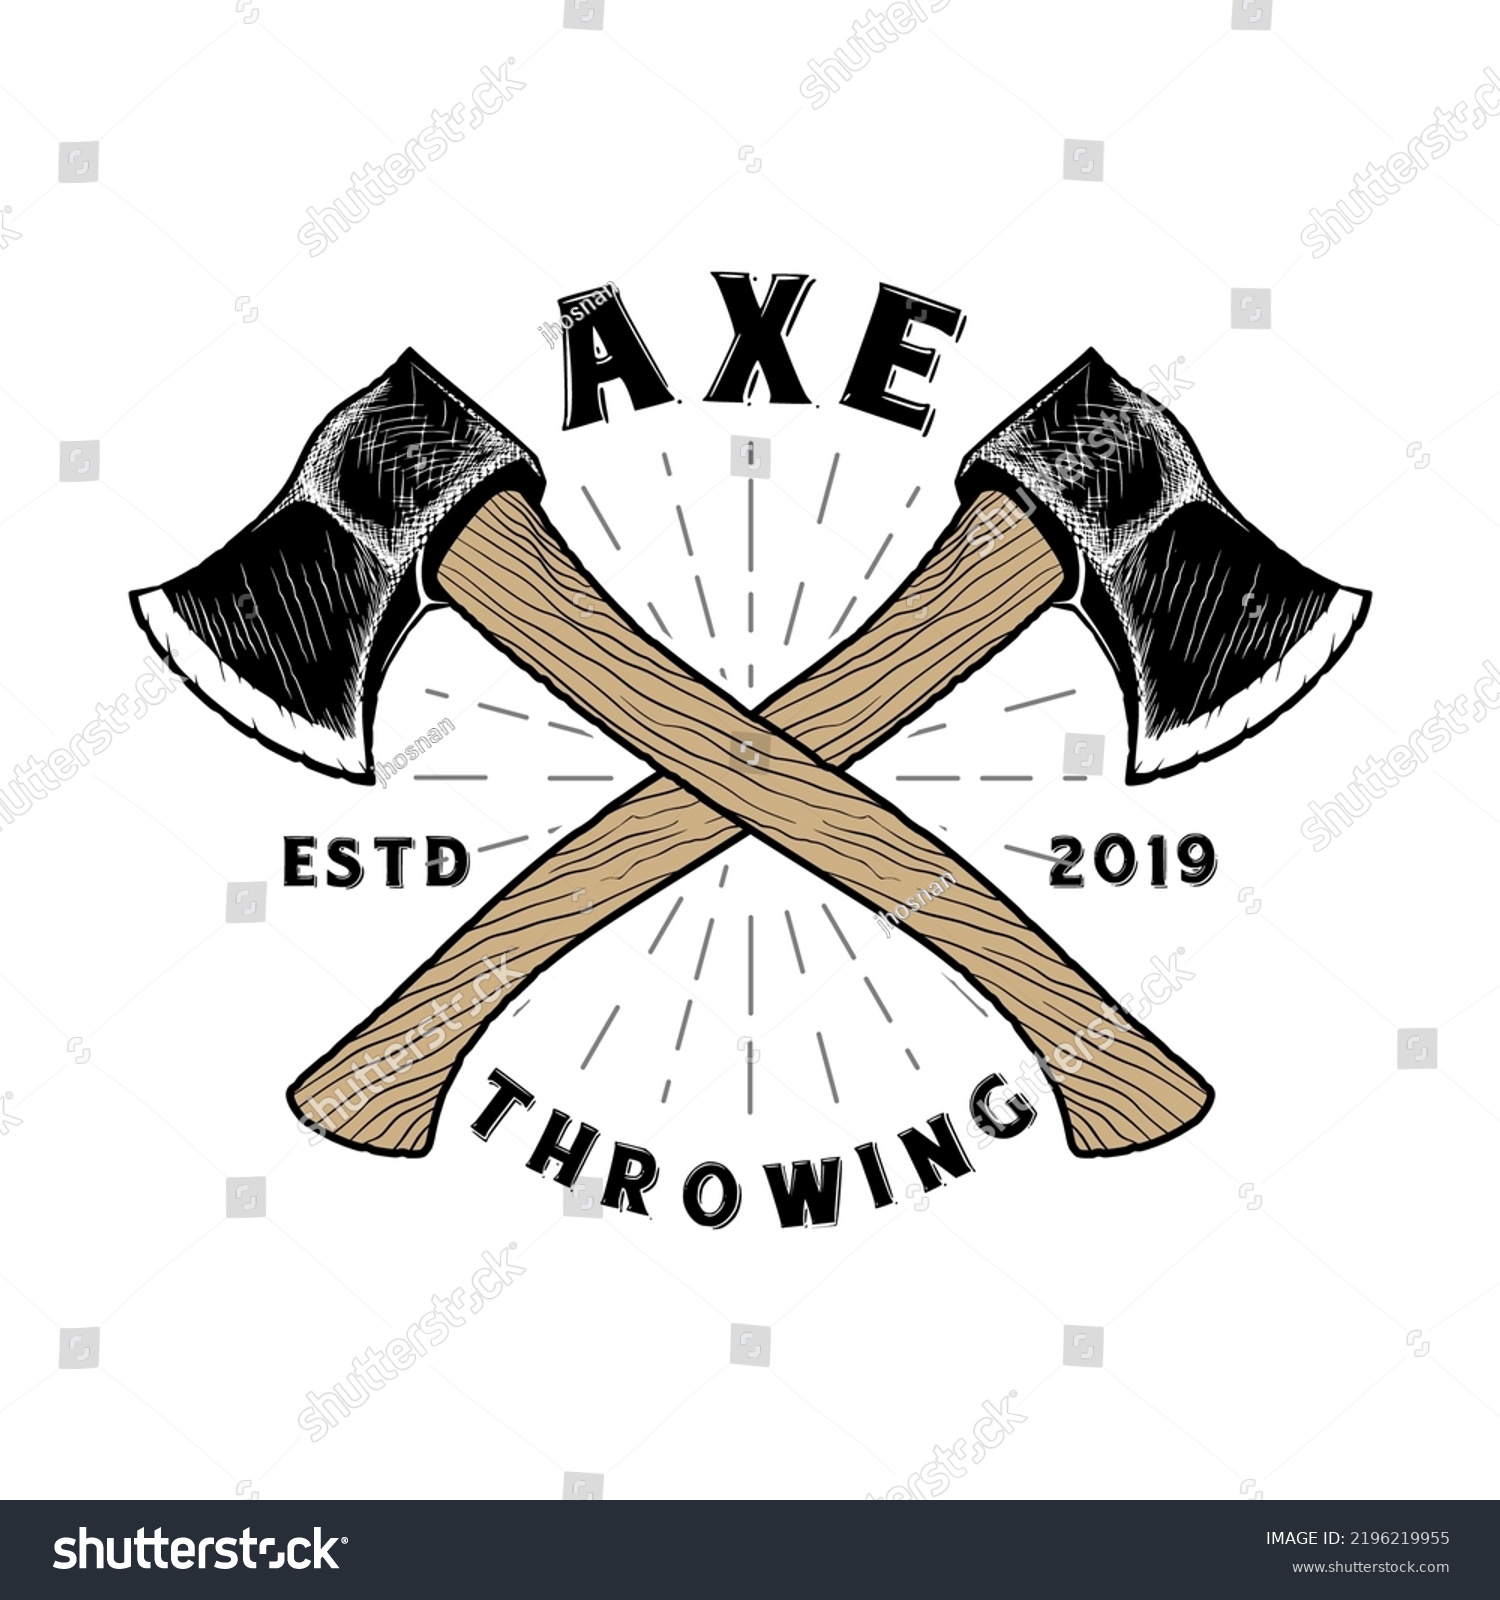 SVG of Throwing ax vector logo design. Cross ax concept, vintage, great for ax throwing clubs.
 svg